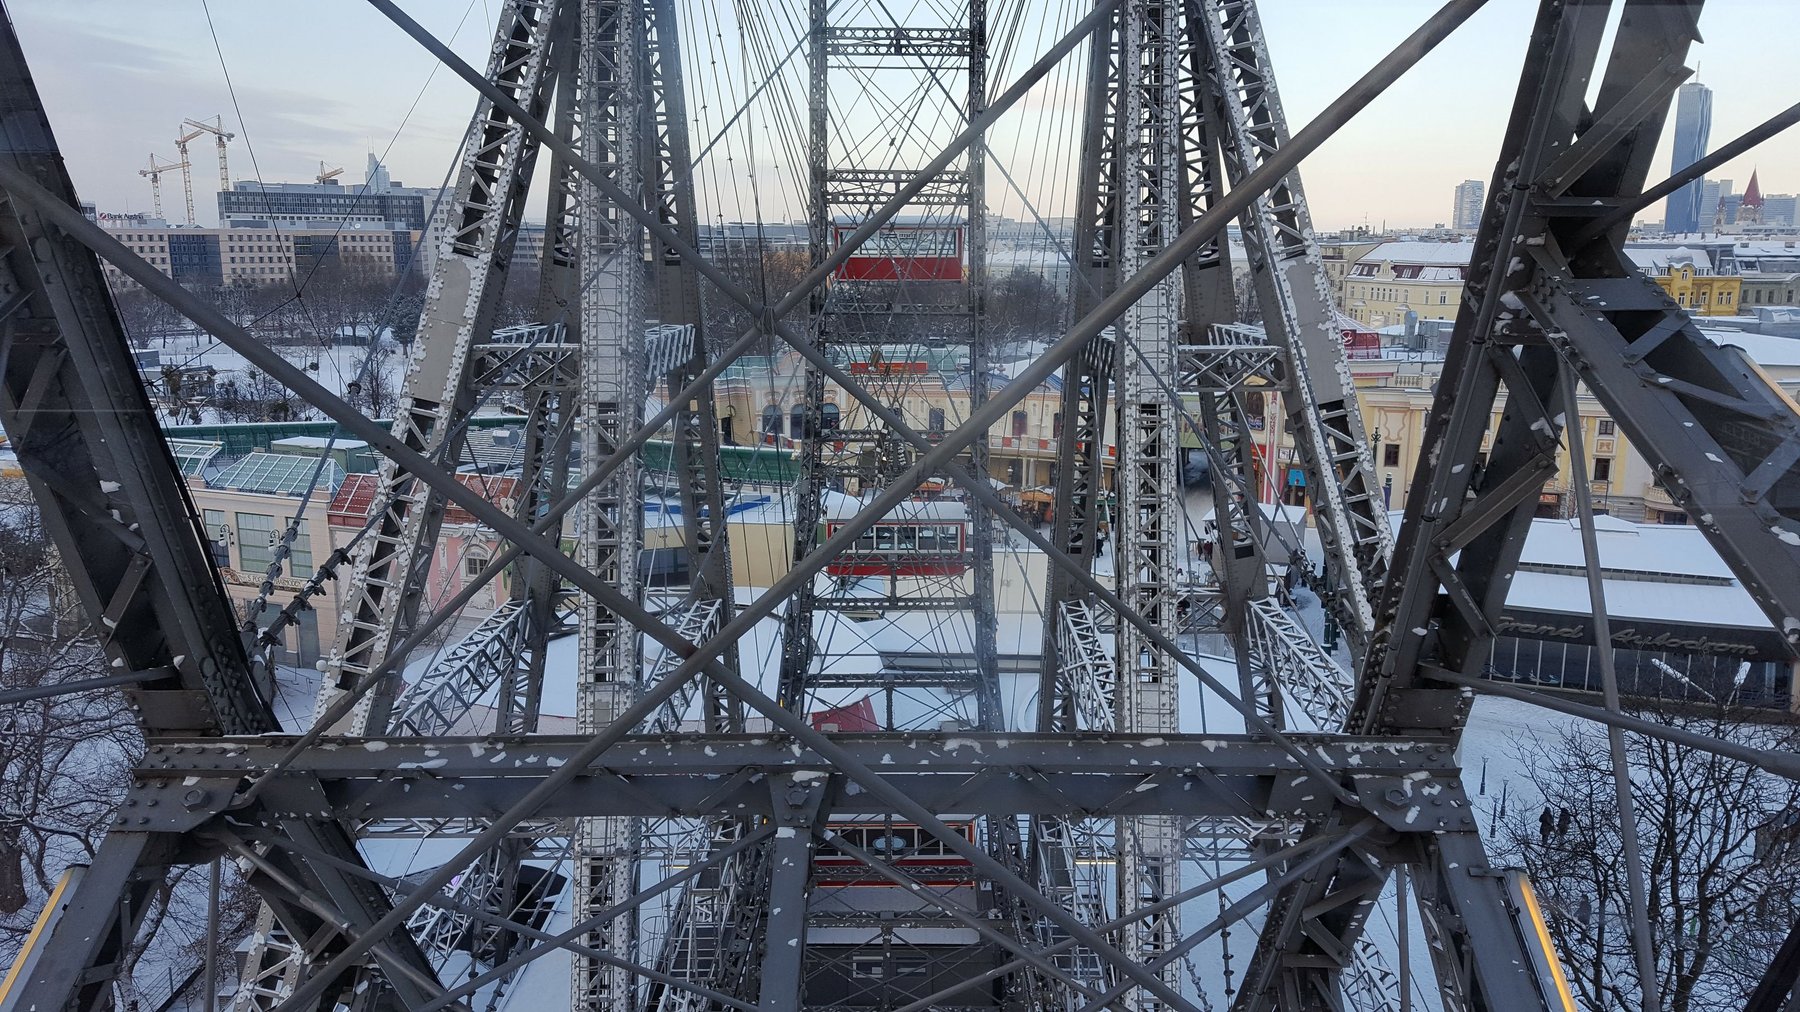 The metal scaffolding of a grand ferris wheel, viewed from inside one of the capsules.